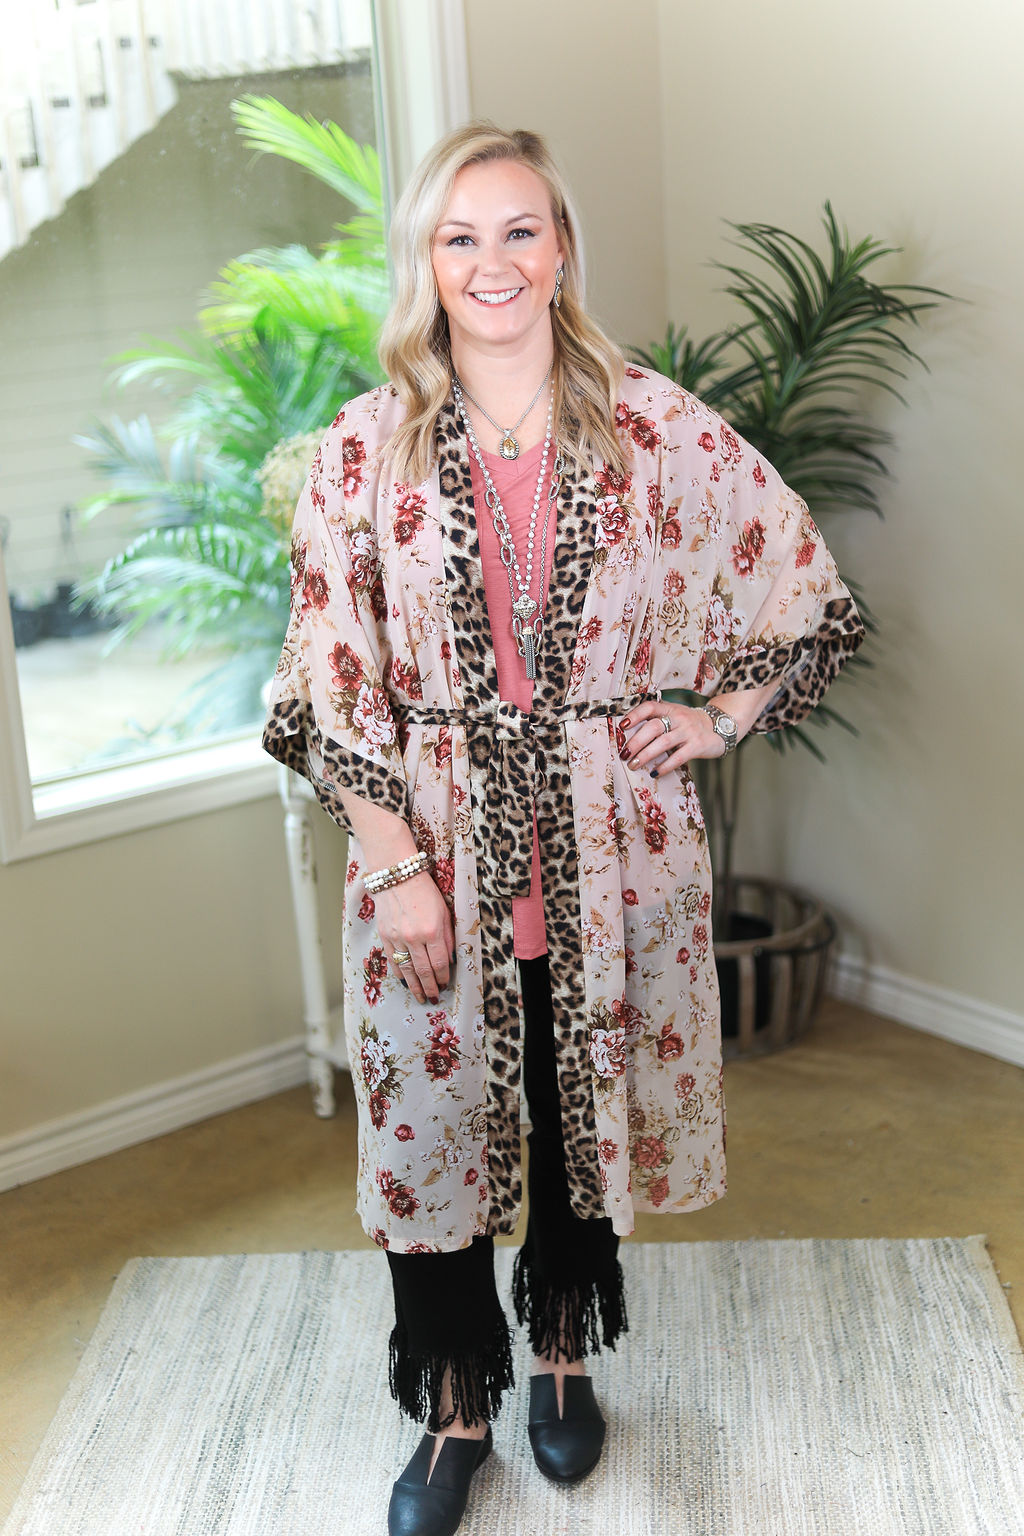 Last Chance Size Small | On My Mind Sheer Floral Print Kimono with Leopard Print Trim in Ivory - Giddy Up Glamour Boutique